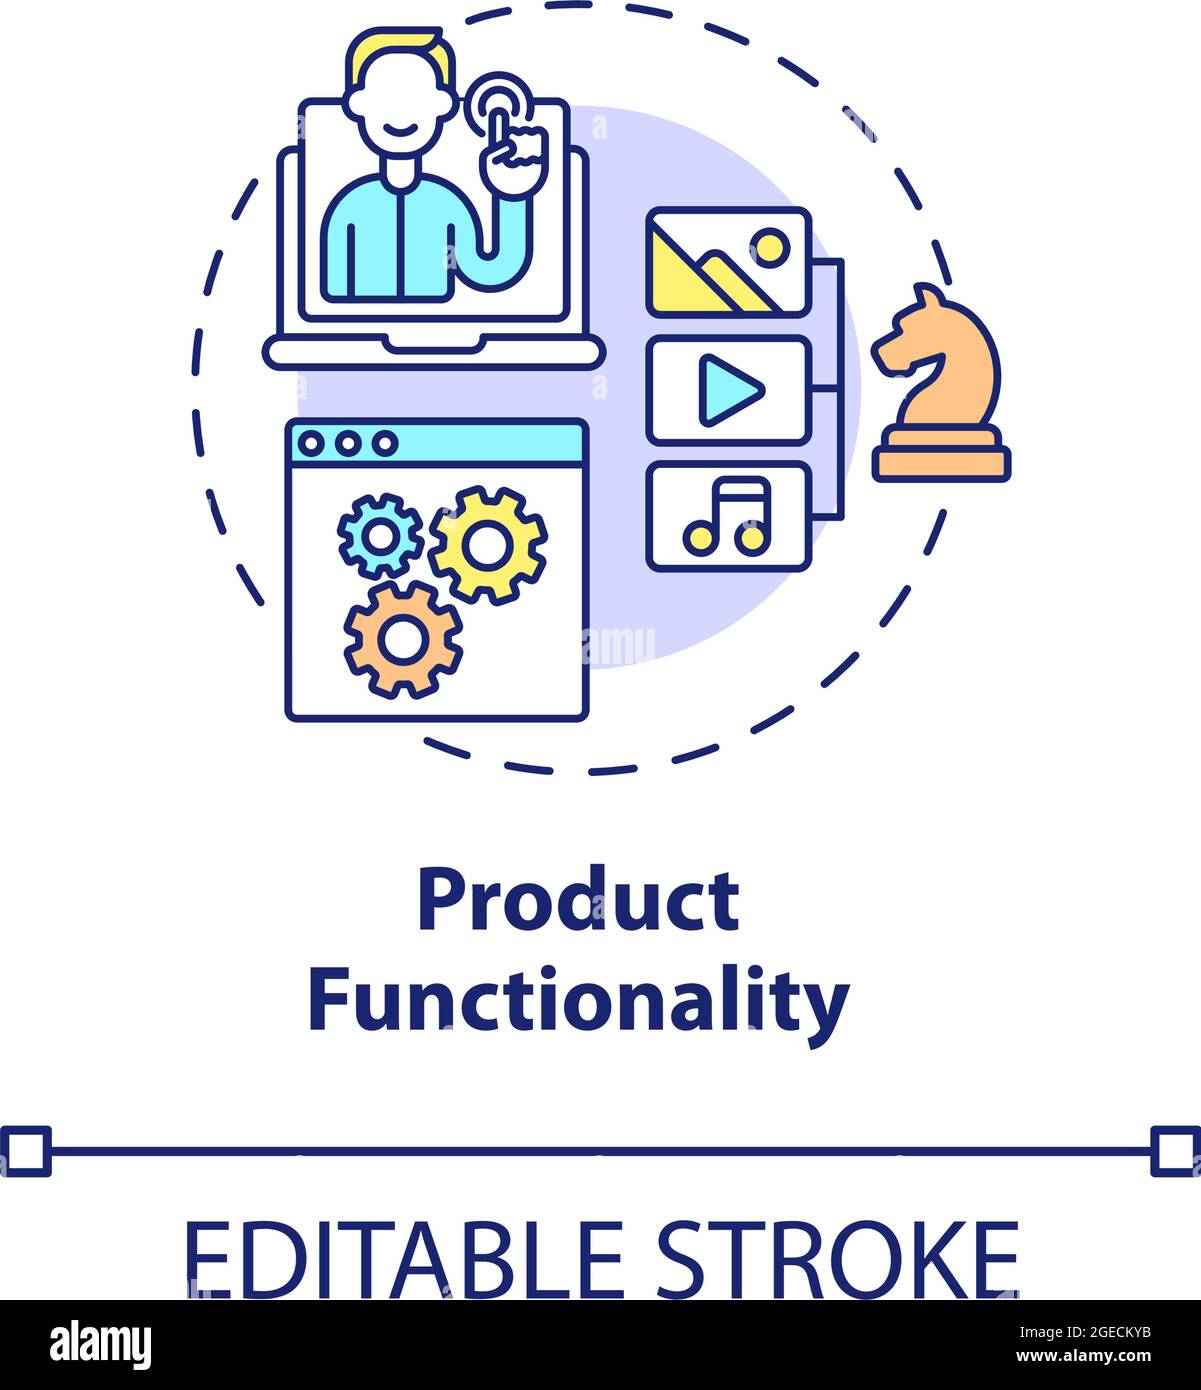 Product functionality concept icon Stock Vector